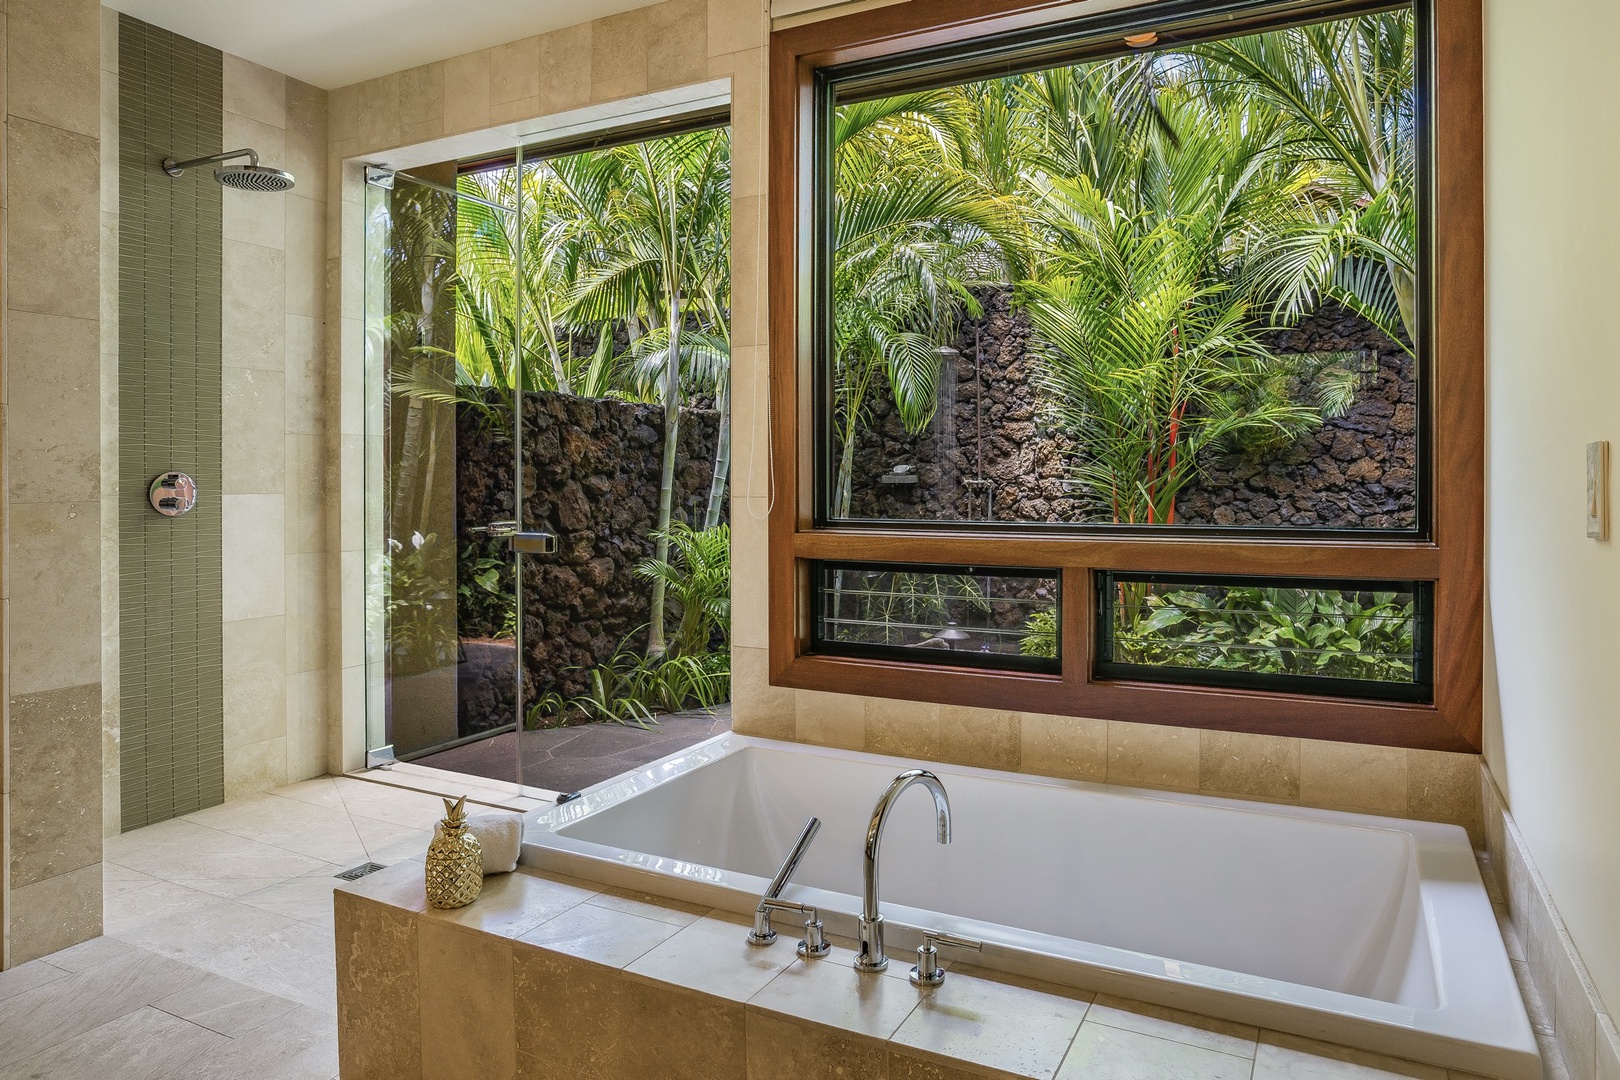 Kailua Kona Vacation Rentals, 4BD Kulanakauhale (3558) Estate Home at Four Seasons Resort at Hualalai - Primary bath’s oversized soaking tub, separate walk-in shower, and outdoor shower garden.